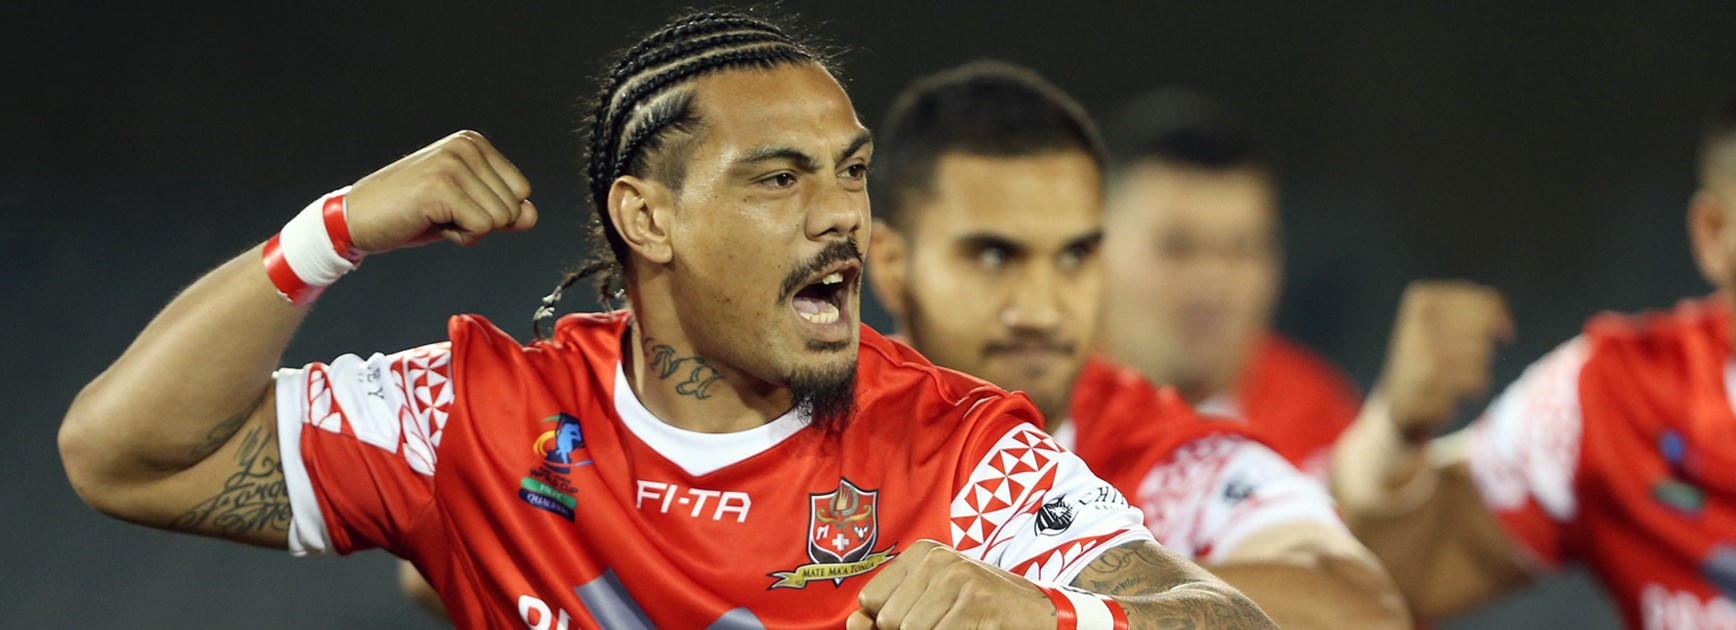 Tonga forward Sika Manu prior to his side's World Cup qualifier against Cook Islands.